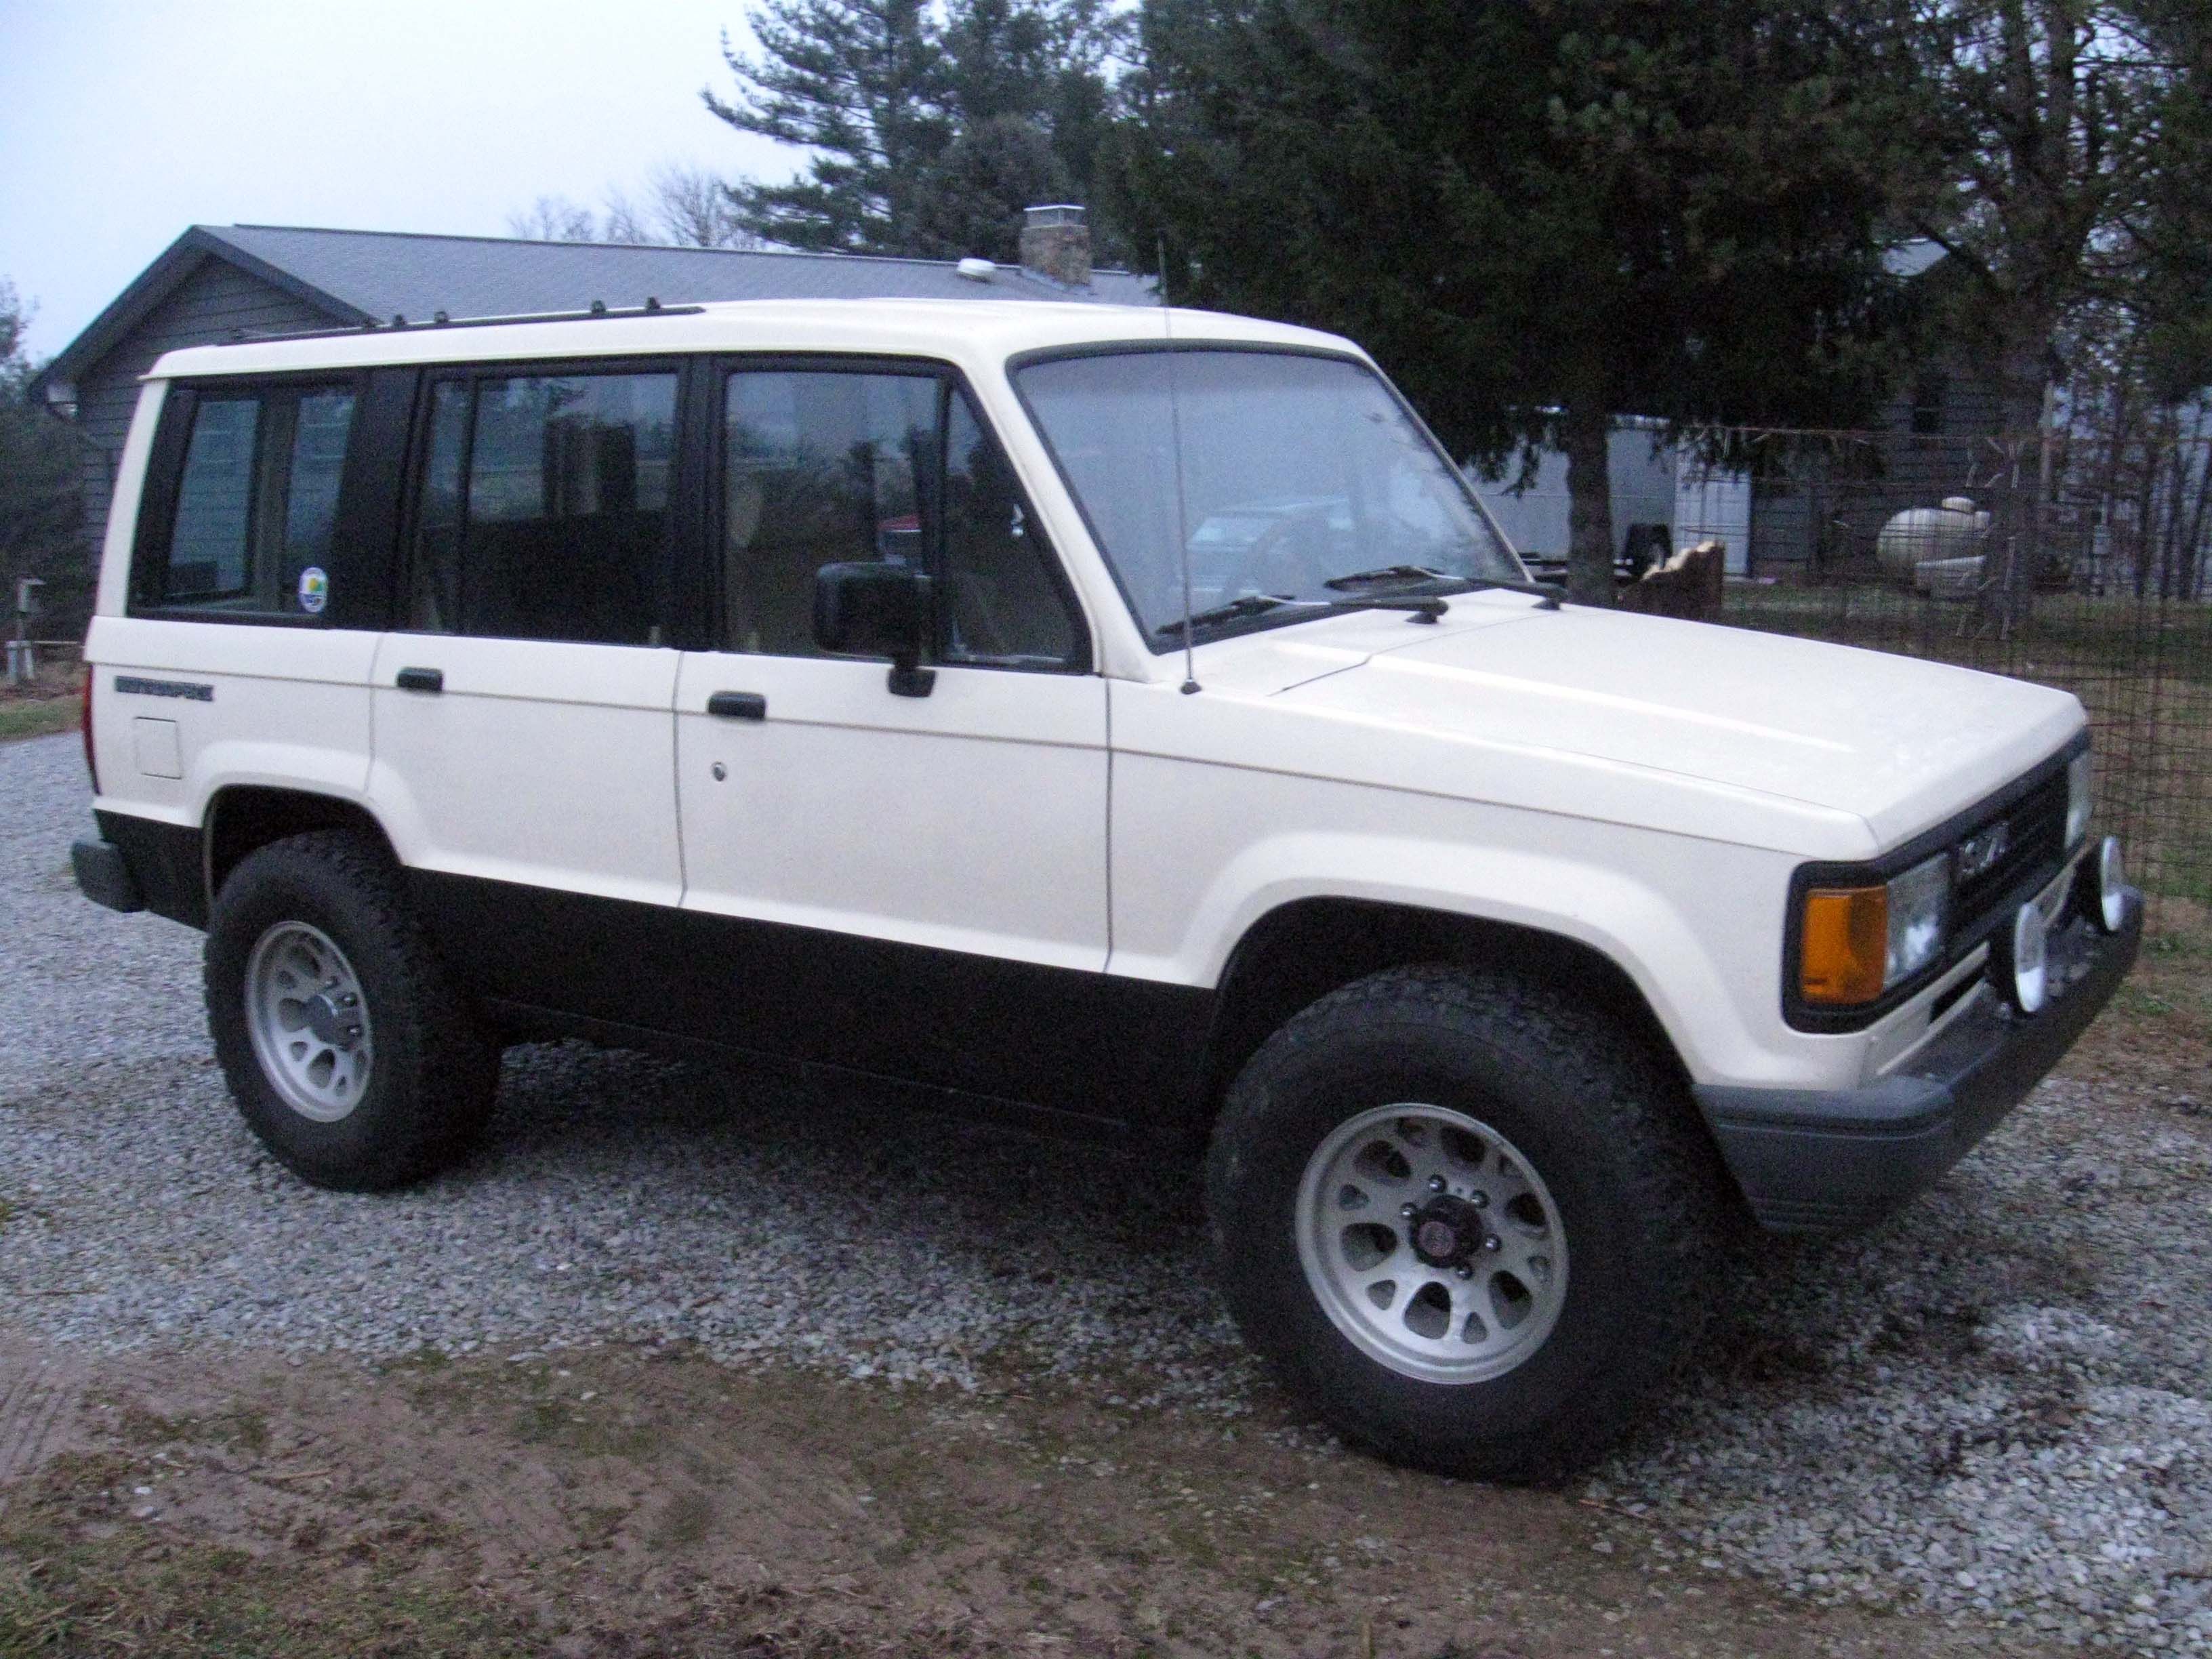 This is like my 1988 Isuzu trooper. For the first time I went on a